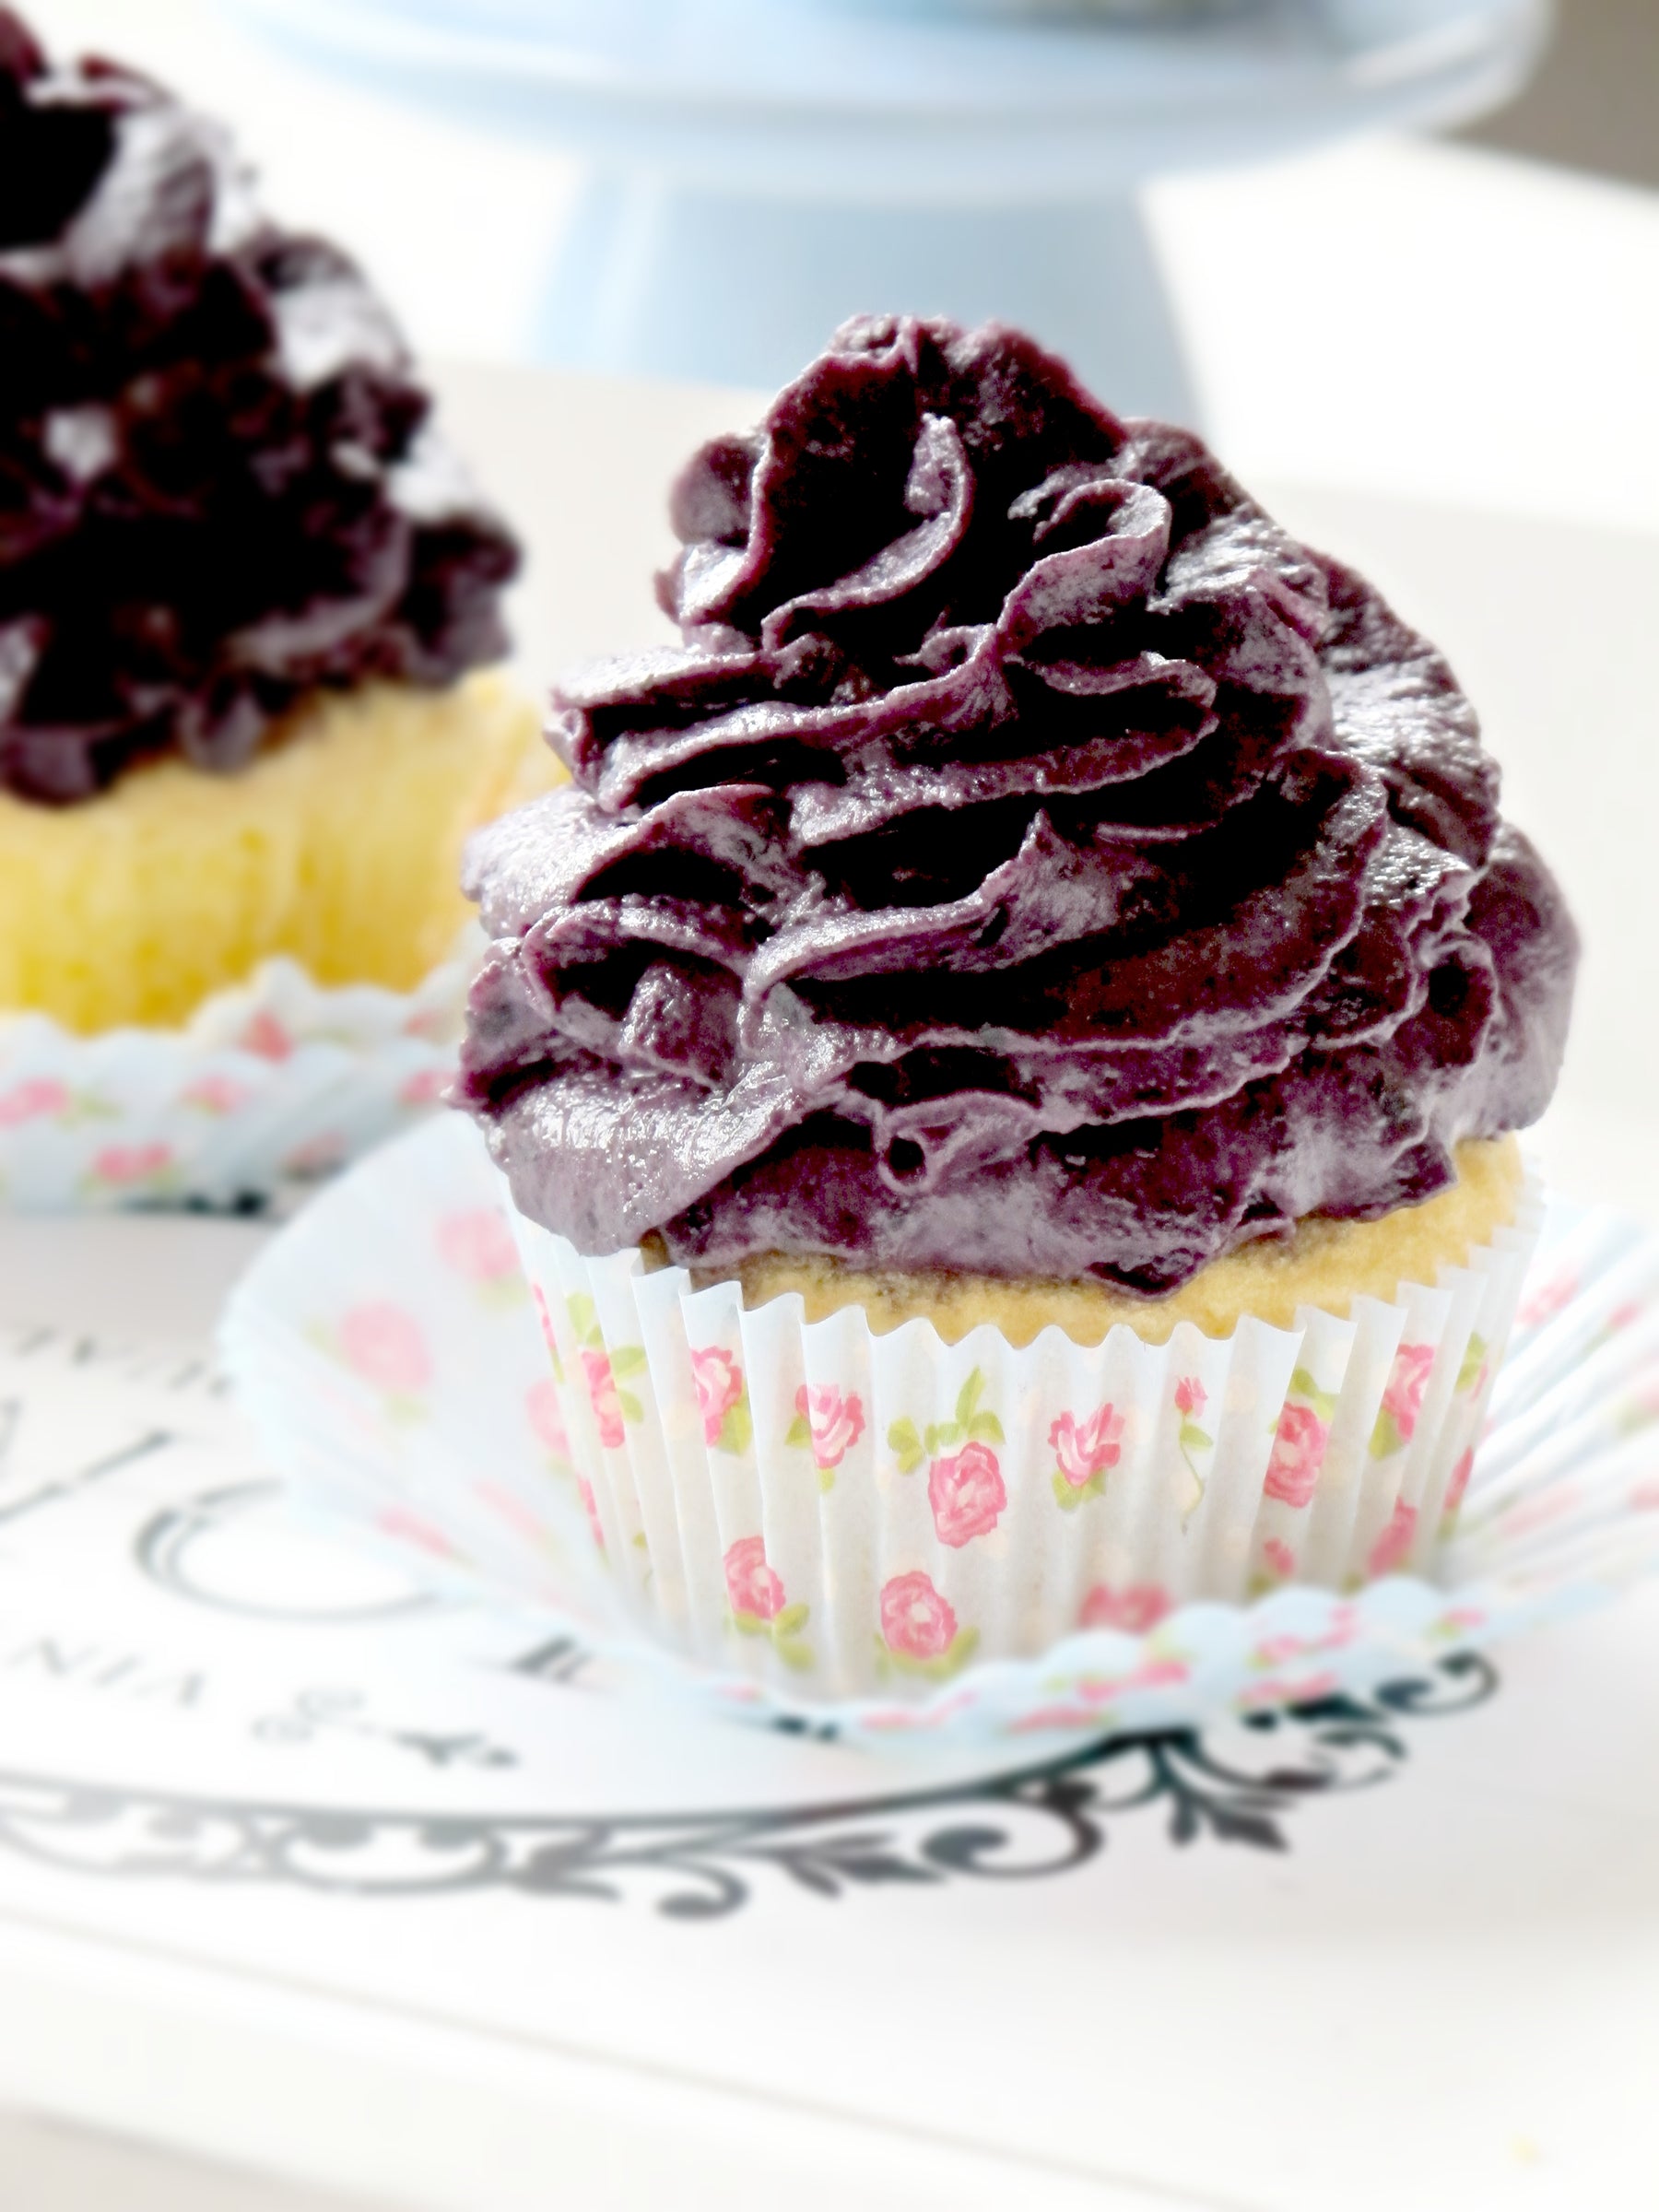 Gluten Free Cupcakes with Acai and Blueberry Frosting